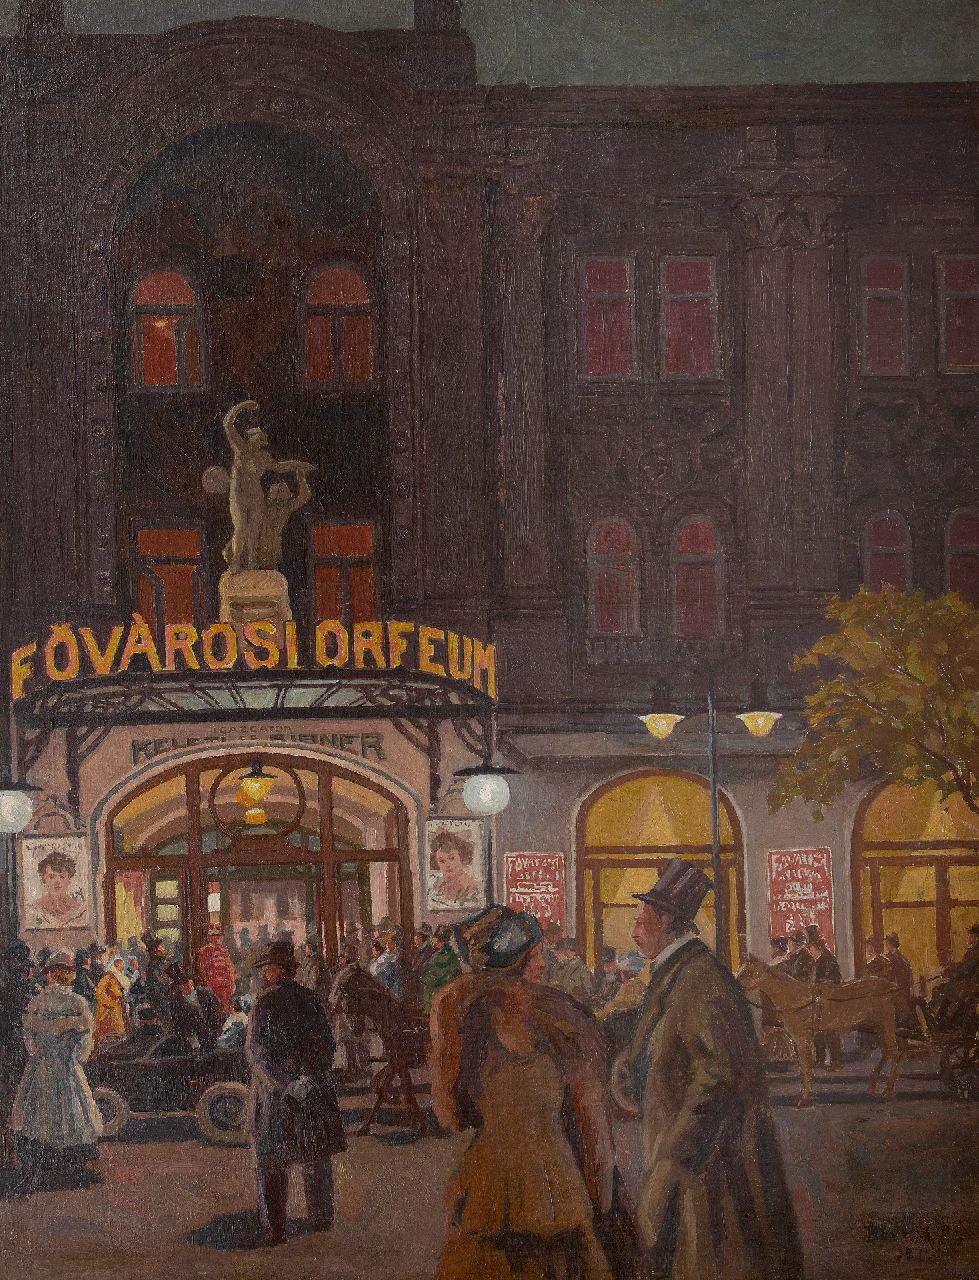 Berkes A.  | Antal Berkes | Paintings offered for sale | At the Variety Theater Fövárosi Orfeum in Budapest, oil on canvas 115.3 x 89.0 cm, signed l.r. and dated (unclaer)